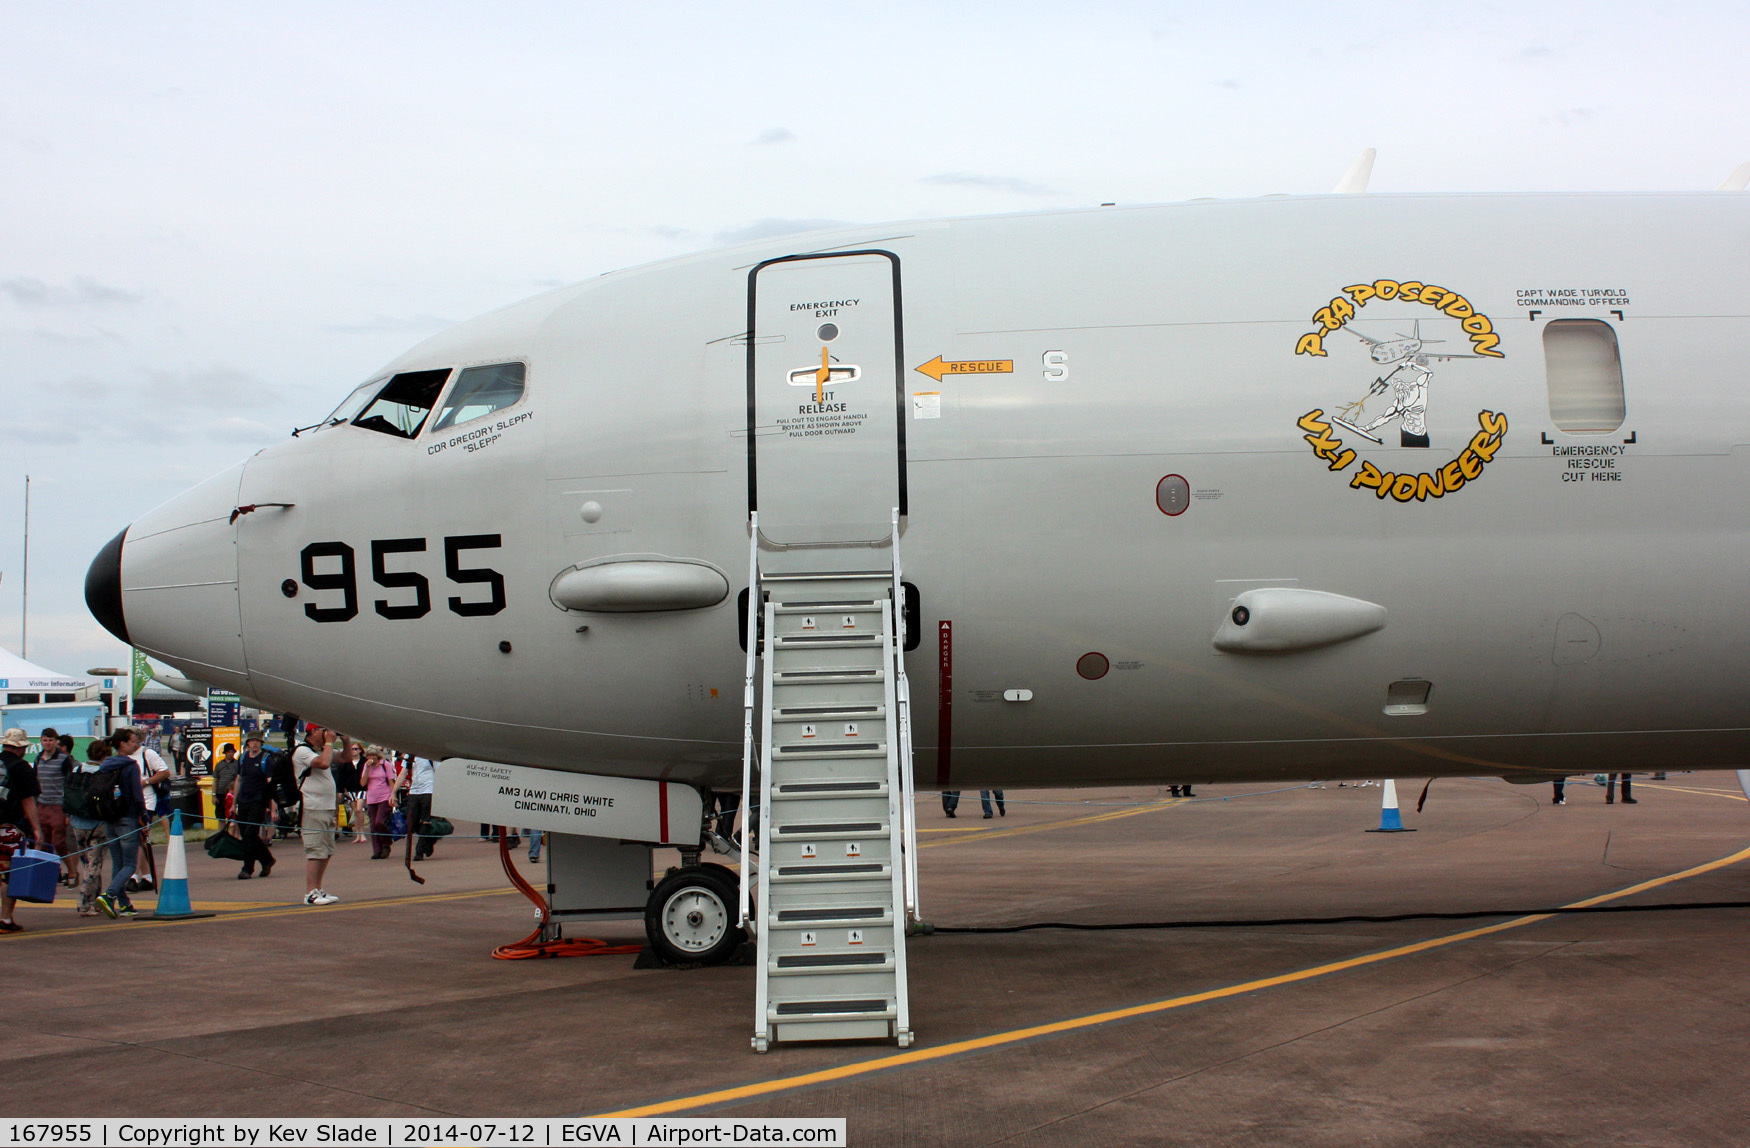 167955, 2011 Boeing P-8A Poseidon C/N 40595, Shot of the front fuselage showing the artwork.